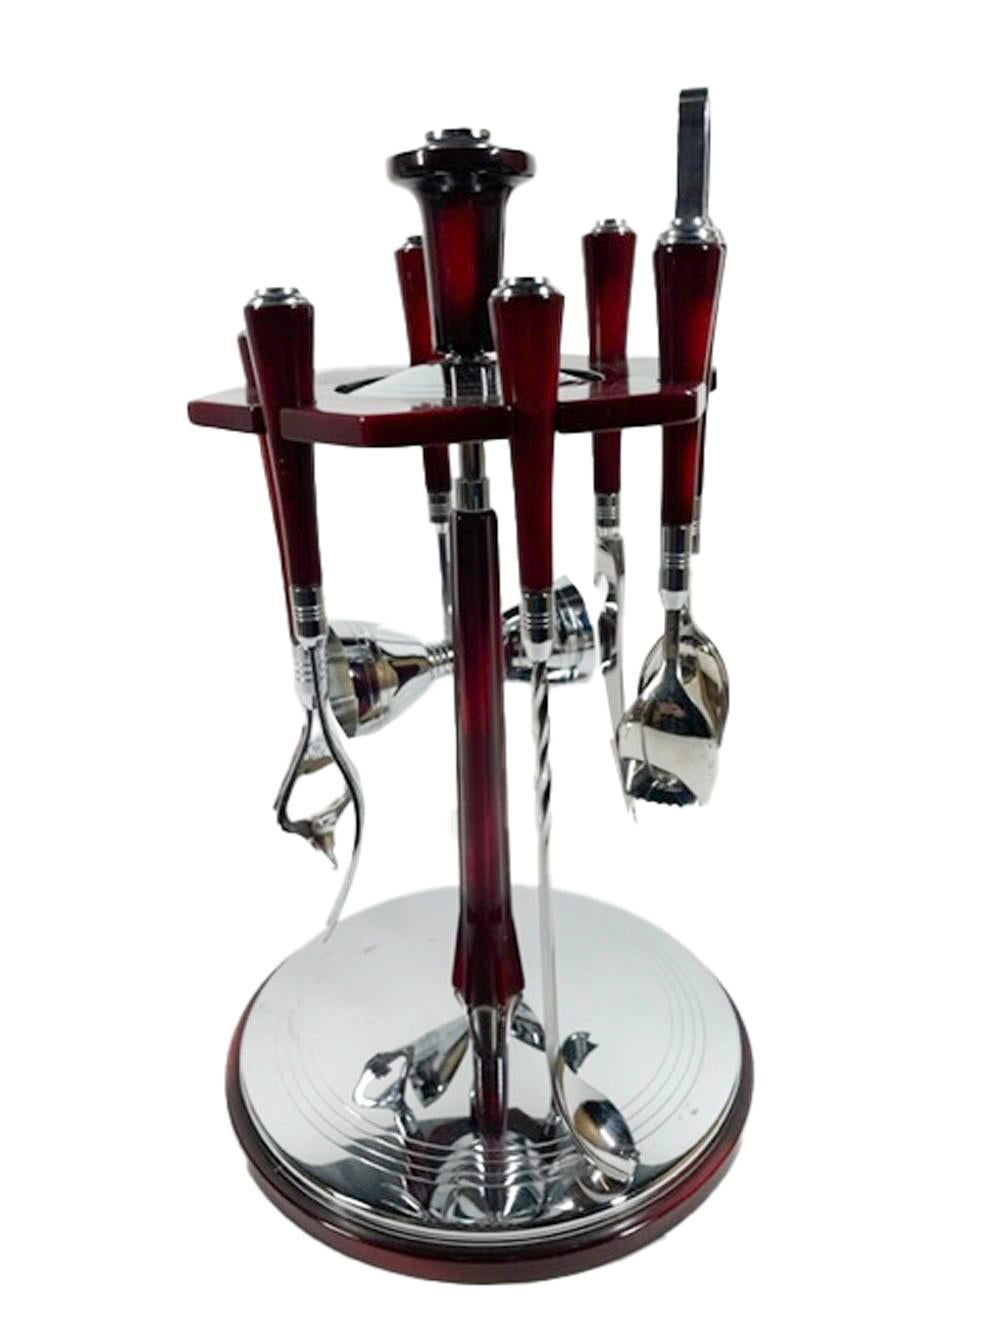 Six-piece bar tool set with revolving stand by Glo-Hill in red/black mottled faux tortoise Bakelite and chrome. A hexagonal Bakelite plate with cut-outs for the six tools is supported on a central column on a circular base.